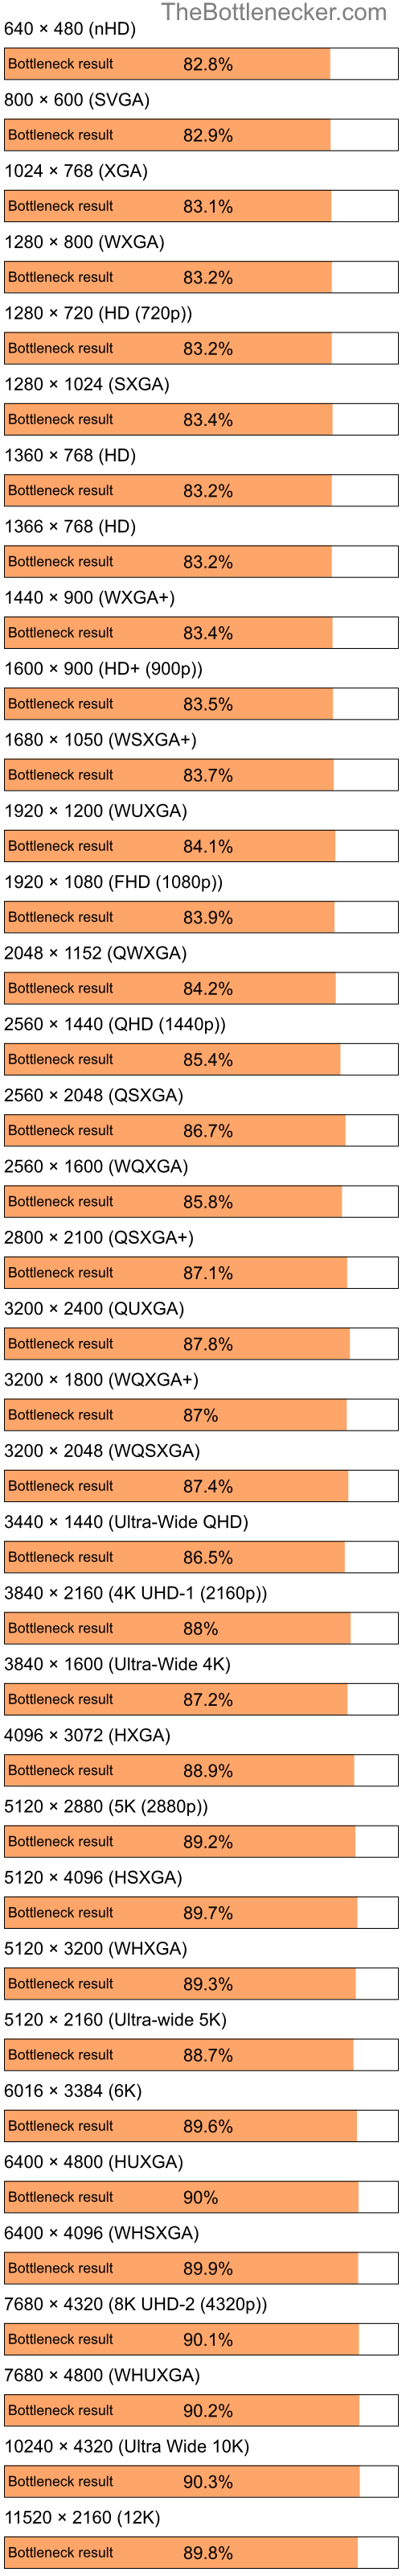 Bottleneck results by resolution for Intel Atom Z520 and AMD Radeon 9600SE in Graphic Card Intense Tasks